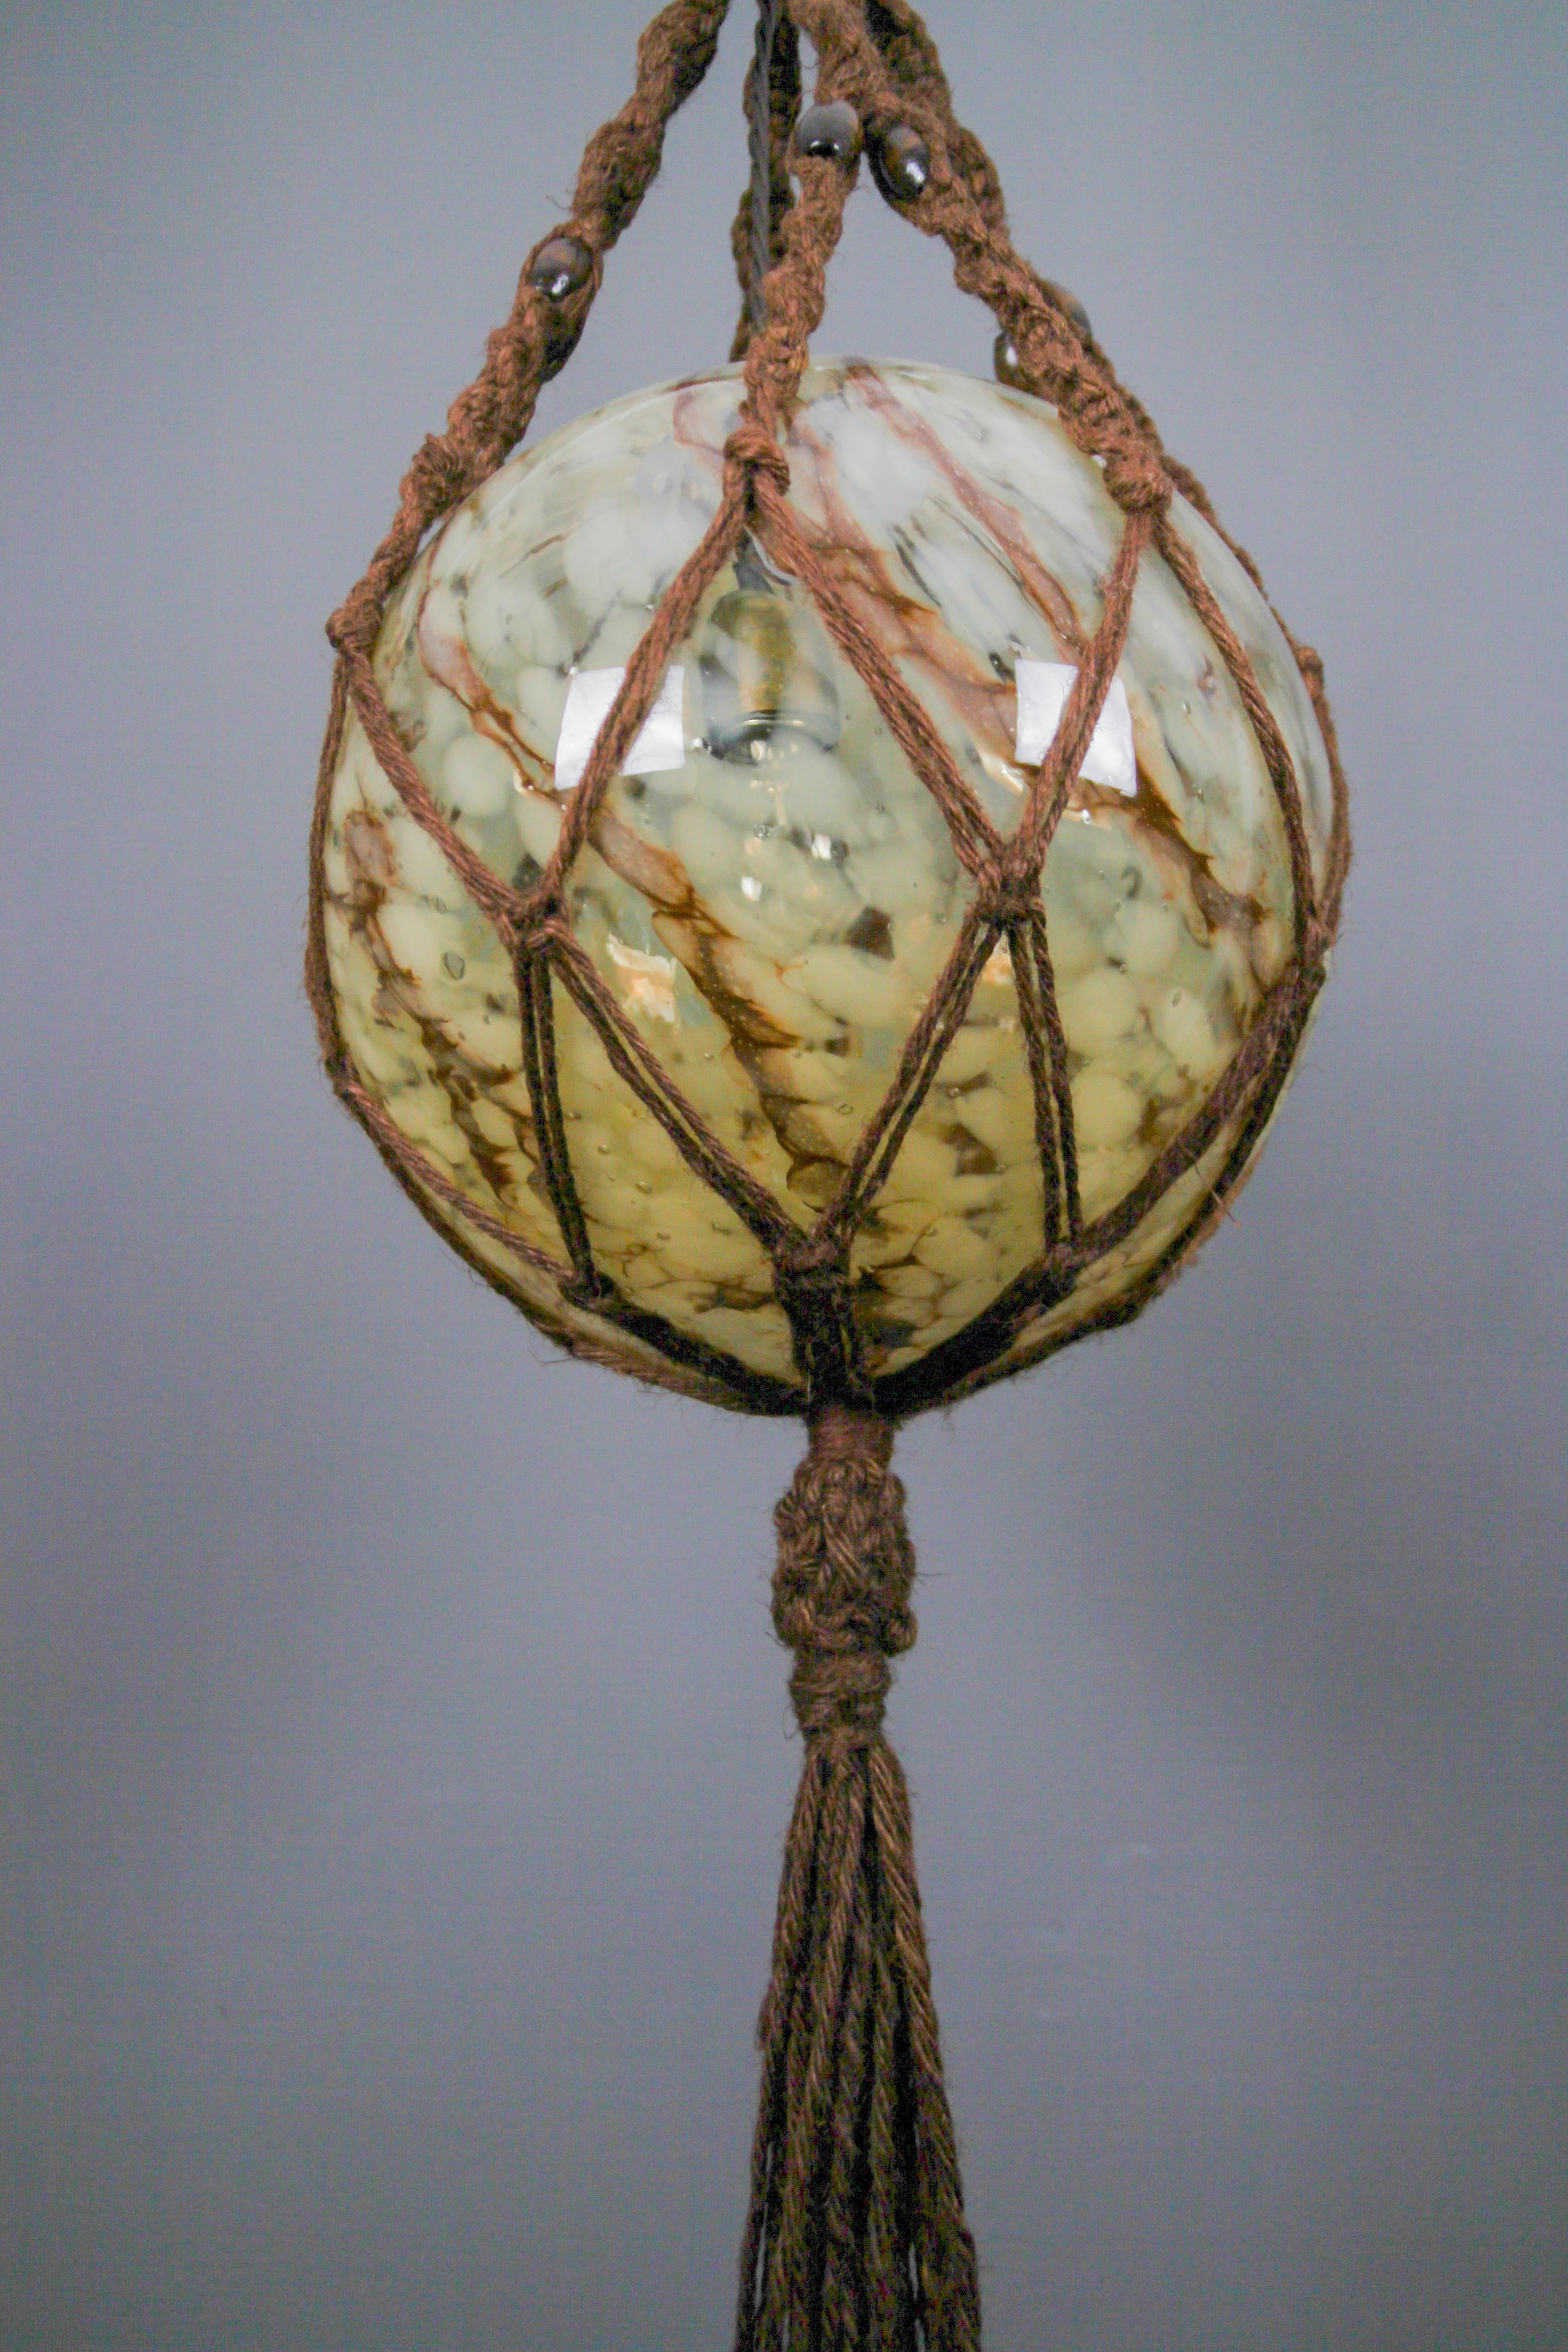 Handmade Braided Sisal and Glass Globe Pendant Light Fixture, 1970s In Good Condition For Sale In Barntrup, DE